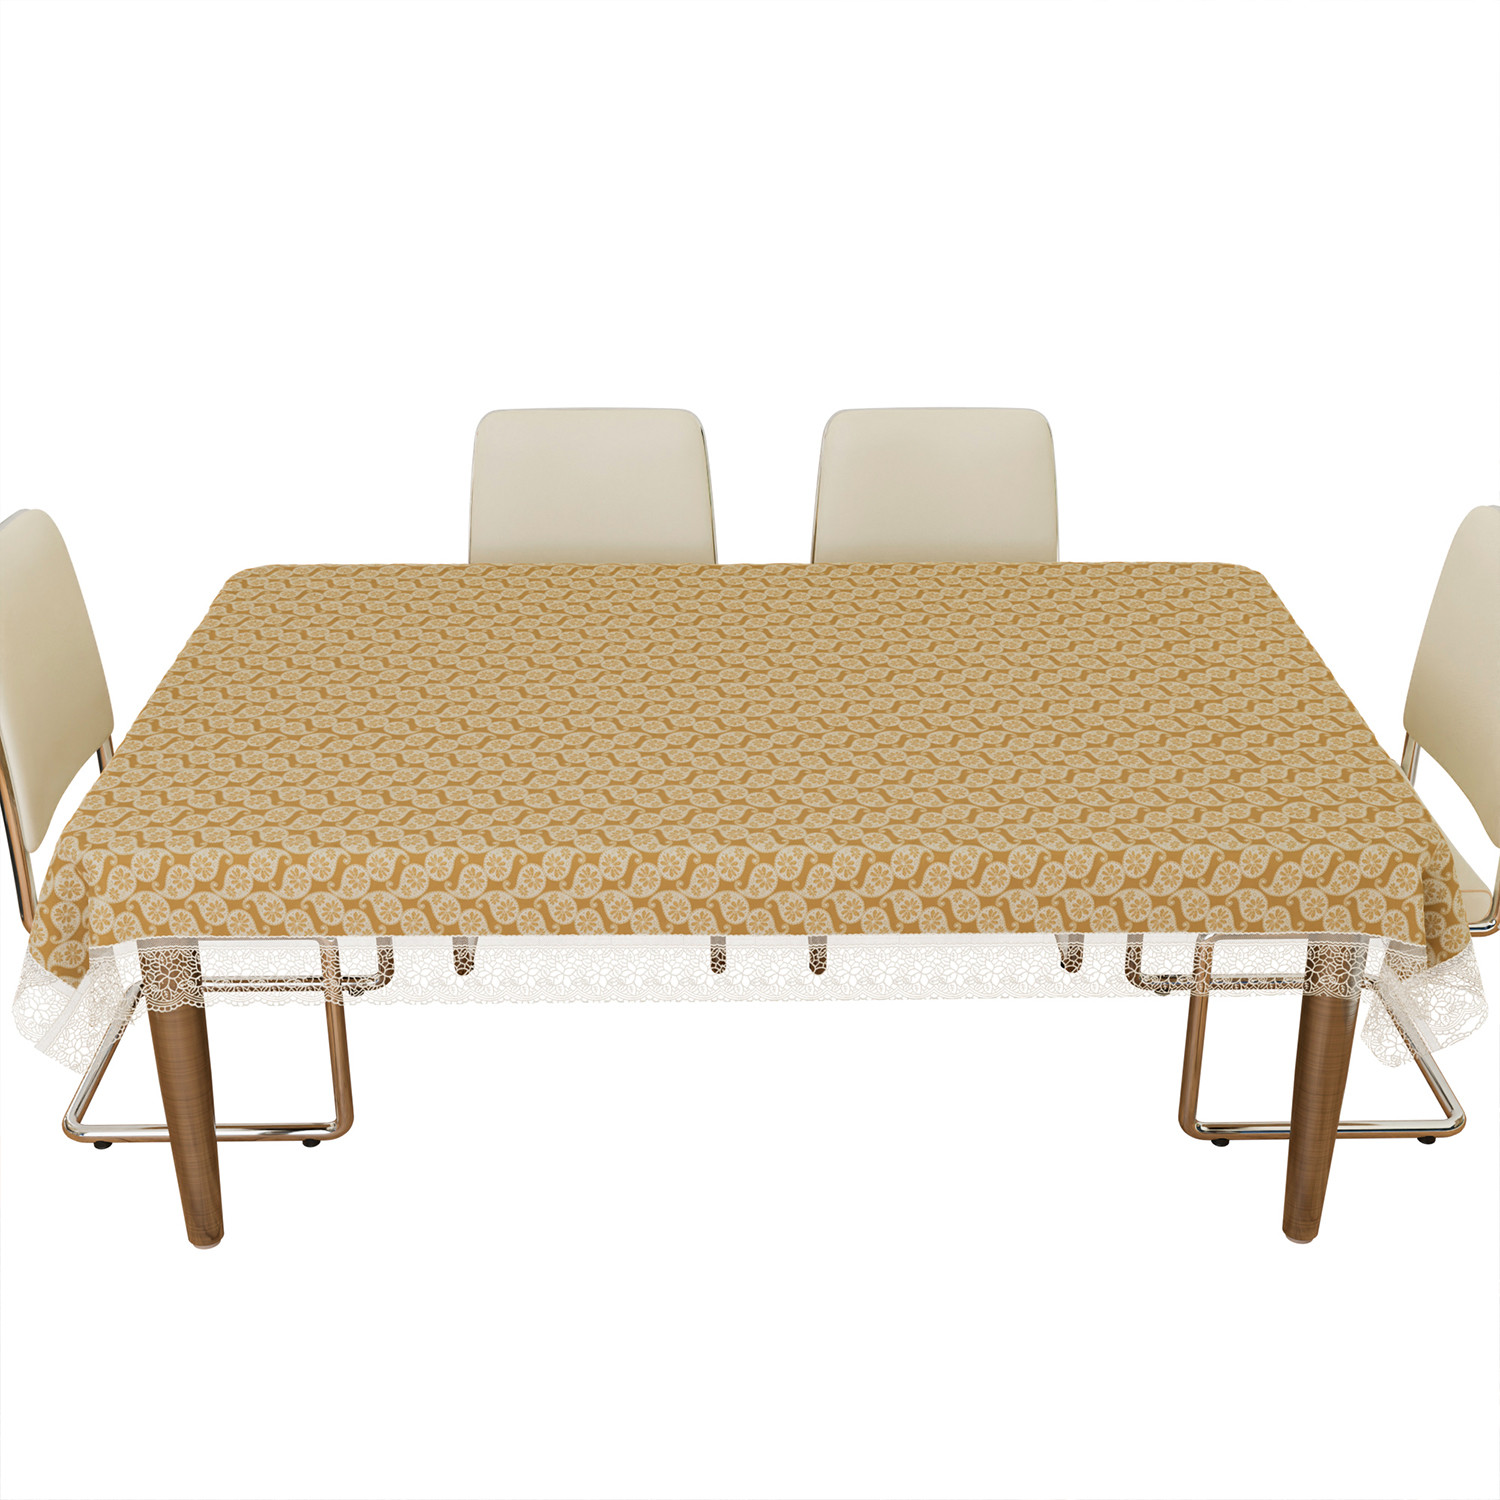 Kuber Industries Dining Table Cover | Kitchen Dining Tablecloth | 6 Seater Dining Table Cover | Dining Table Cover for Hall Décor | Carry Design Tablecloth | DTC | 60x90 | Golden